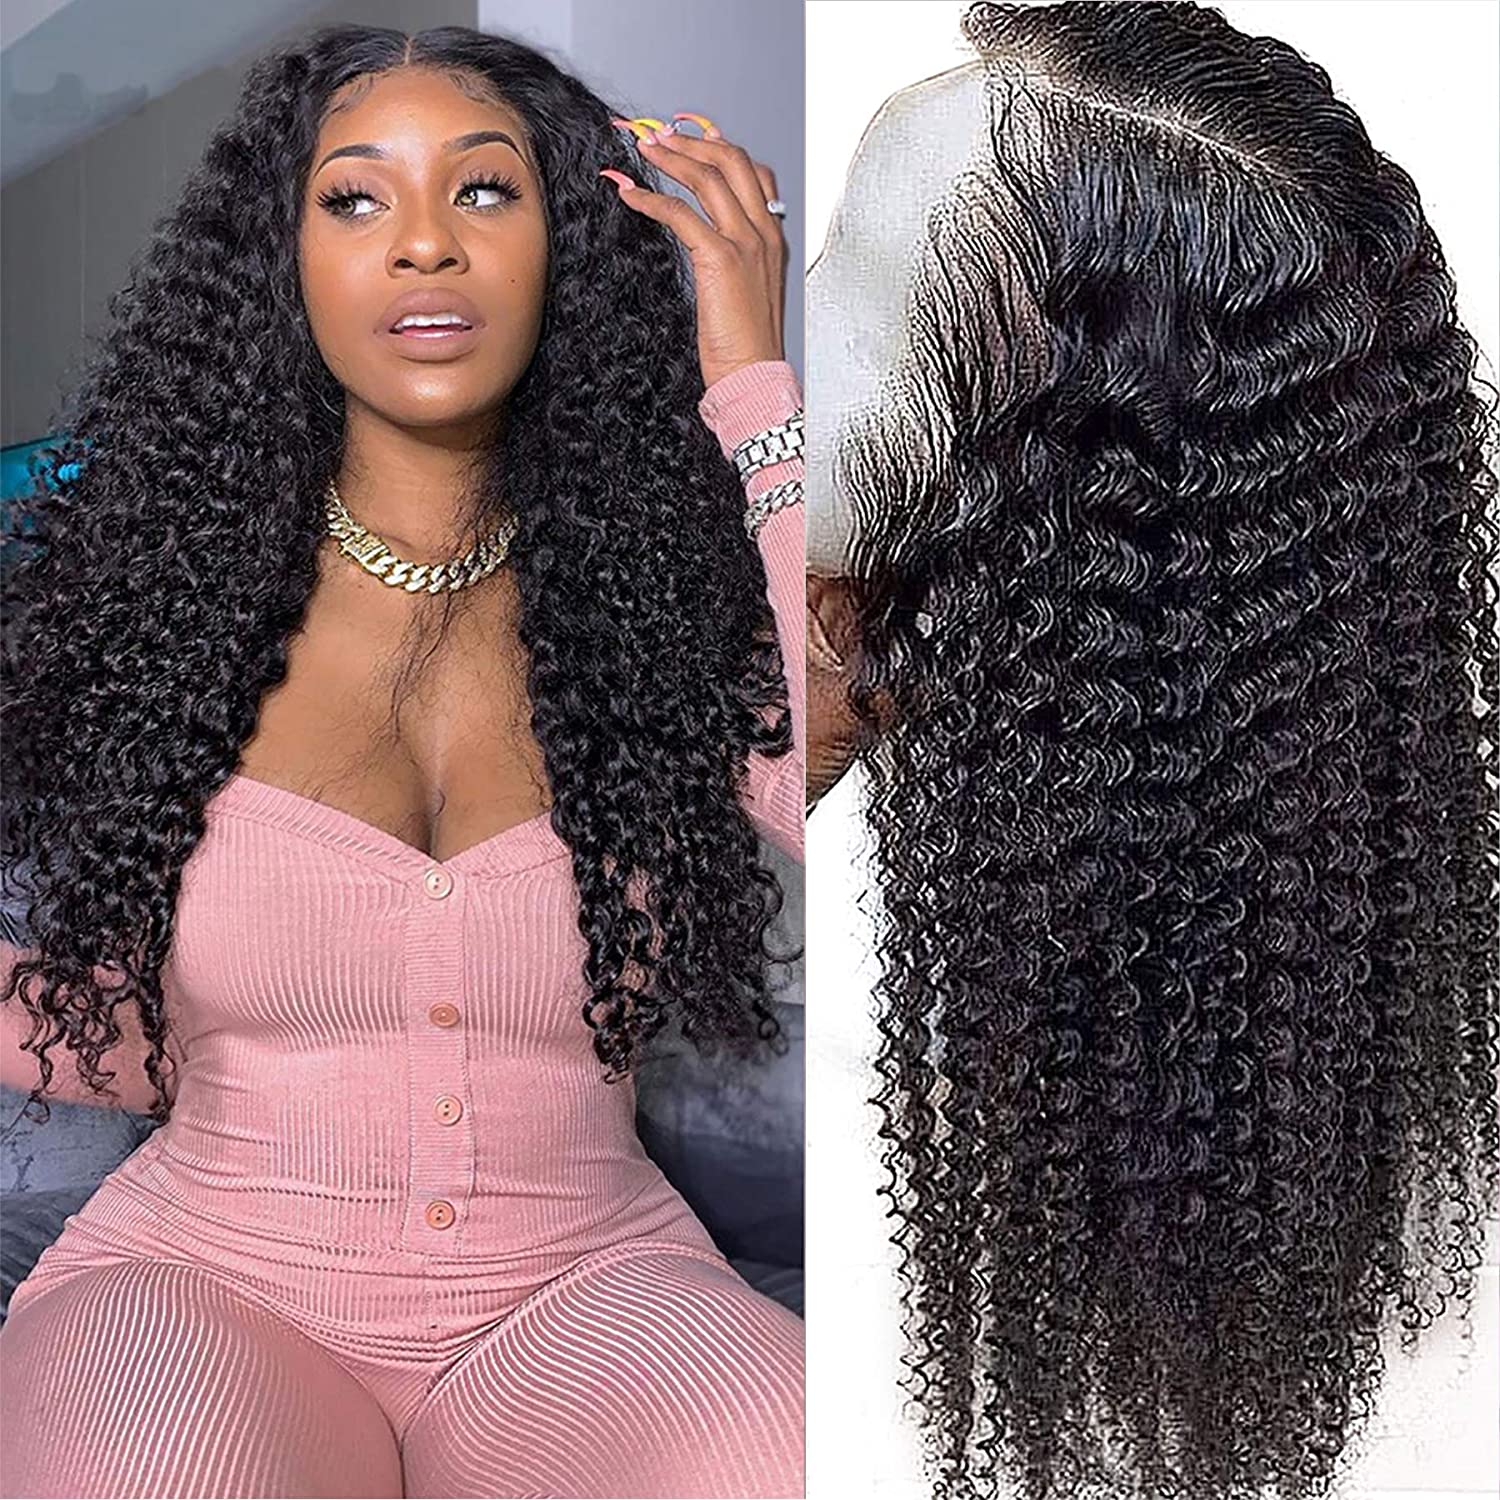 Price:$79.99     12 Inch Short Curly Wigs Deep Wave Lace Front Wigs Human Hair 13x4 Pre-Plucked 150% Density Natural Color 100% Unprocessed Full Ends Lace Wigs   Beauty